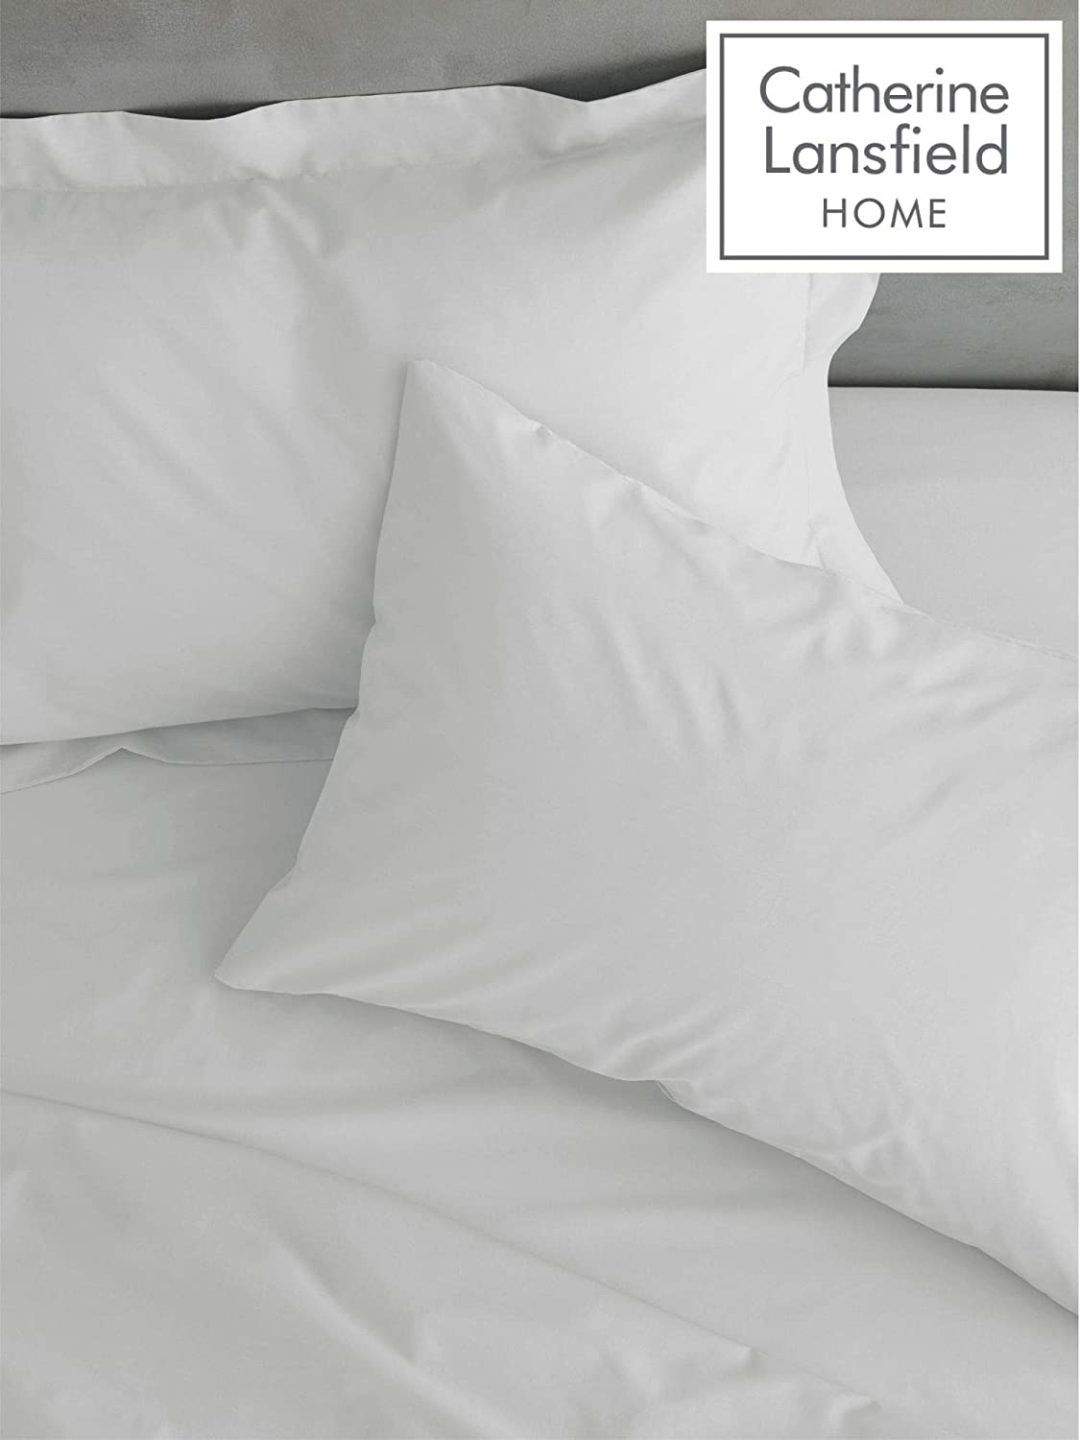 catherine lansfield white sheets & pillowcases